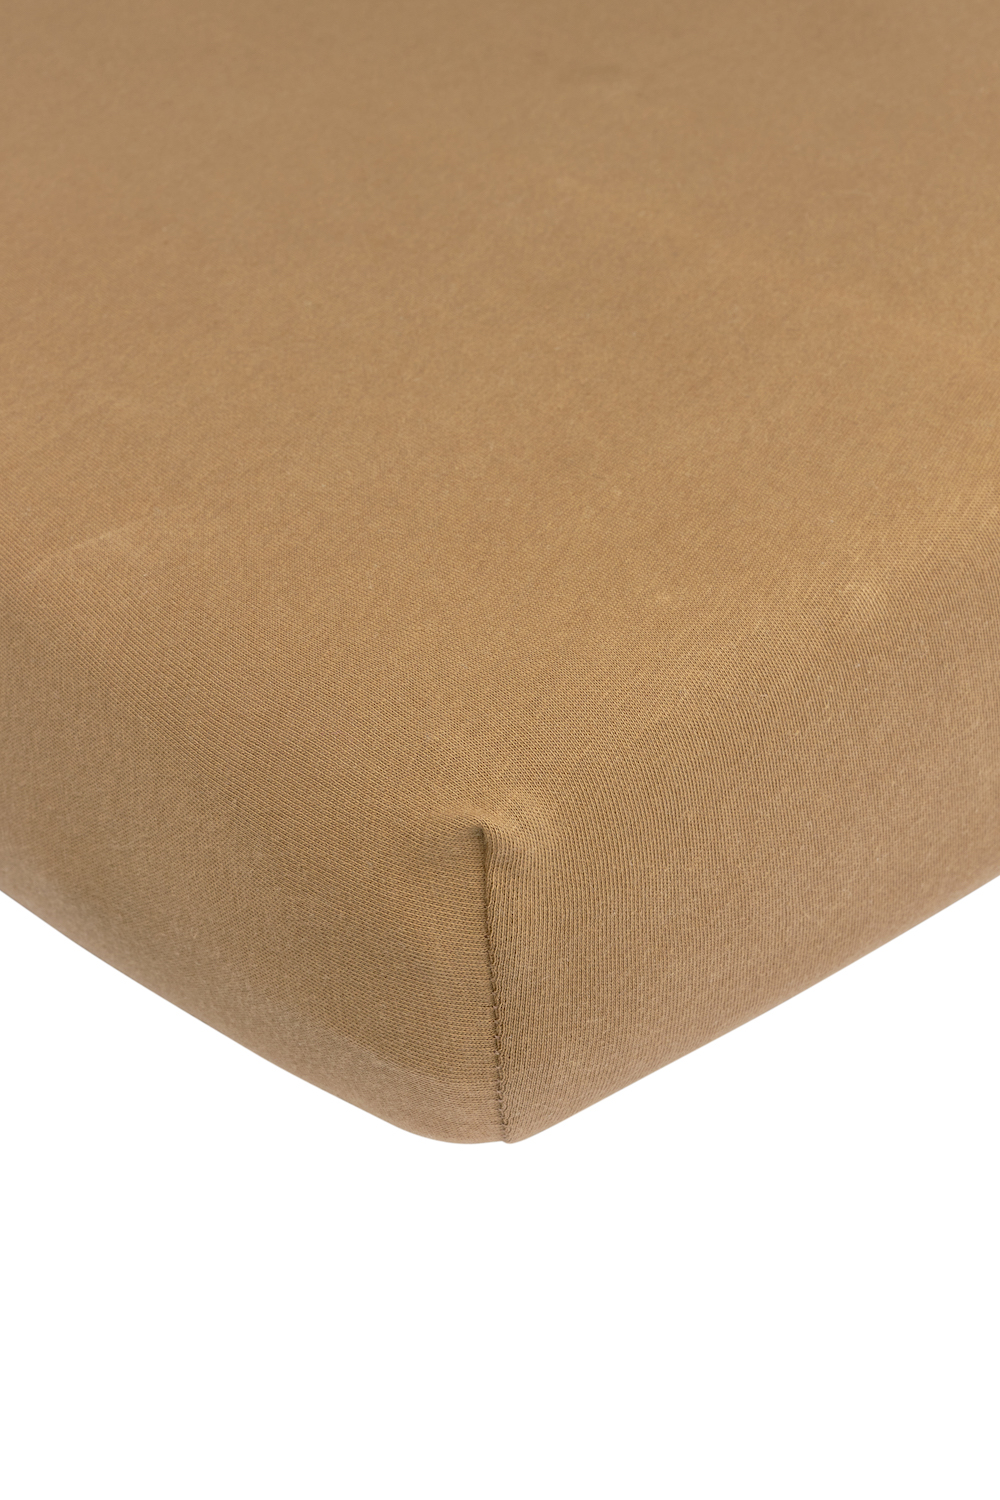 Jersey Fitted Sheet - Toffee - 70x140/150cm